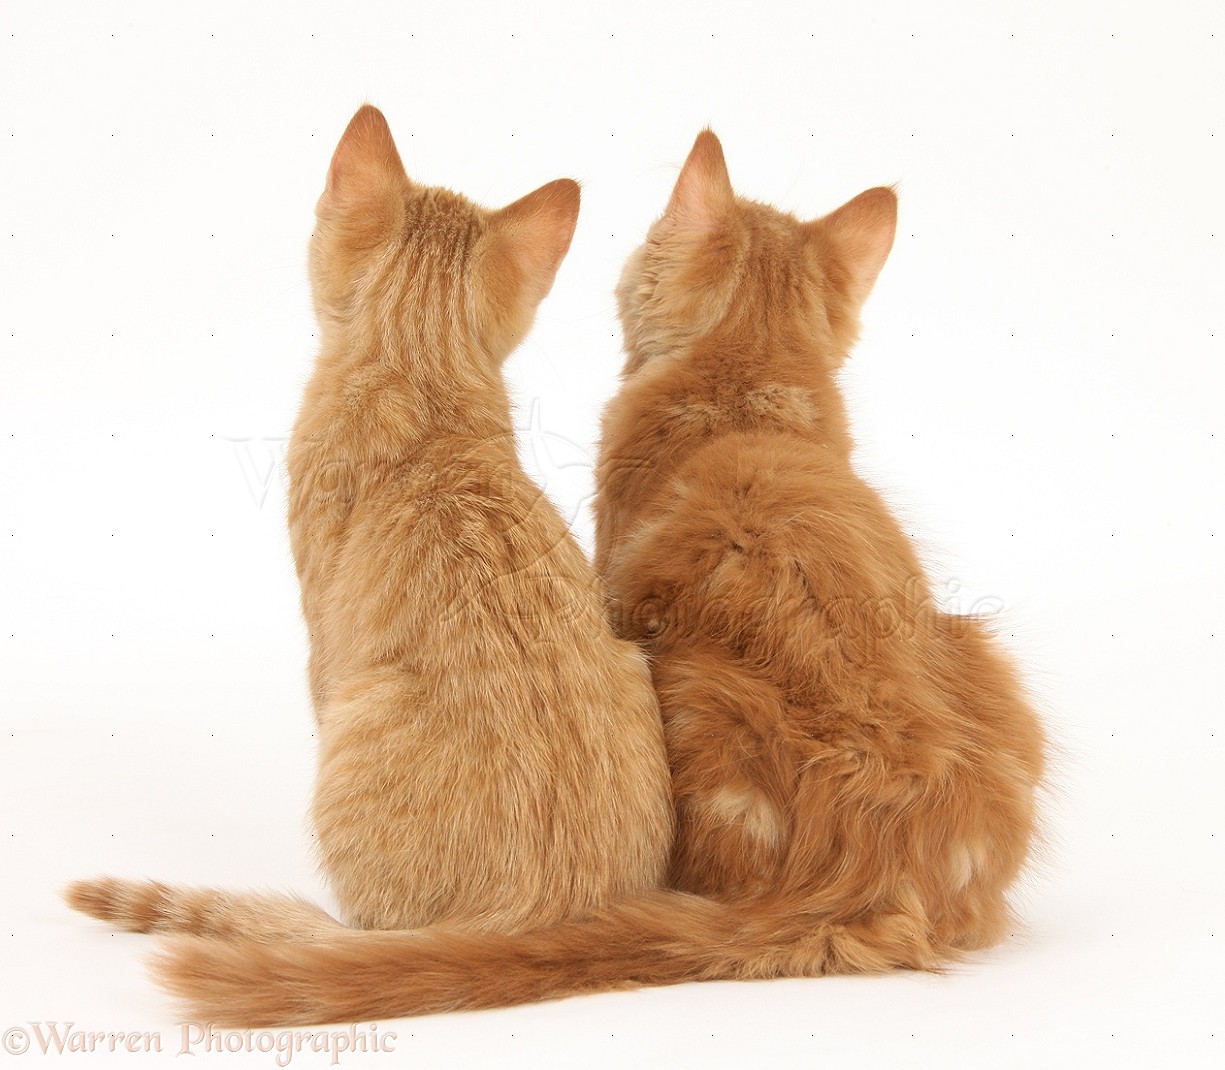 Two ginger kittens, back view photo WP25734